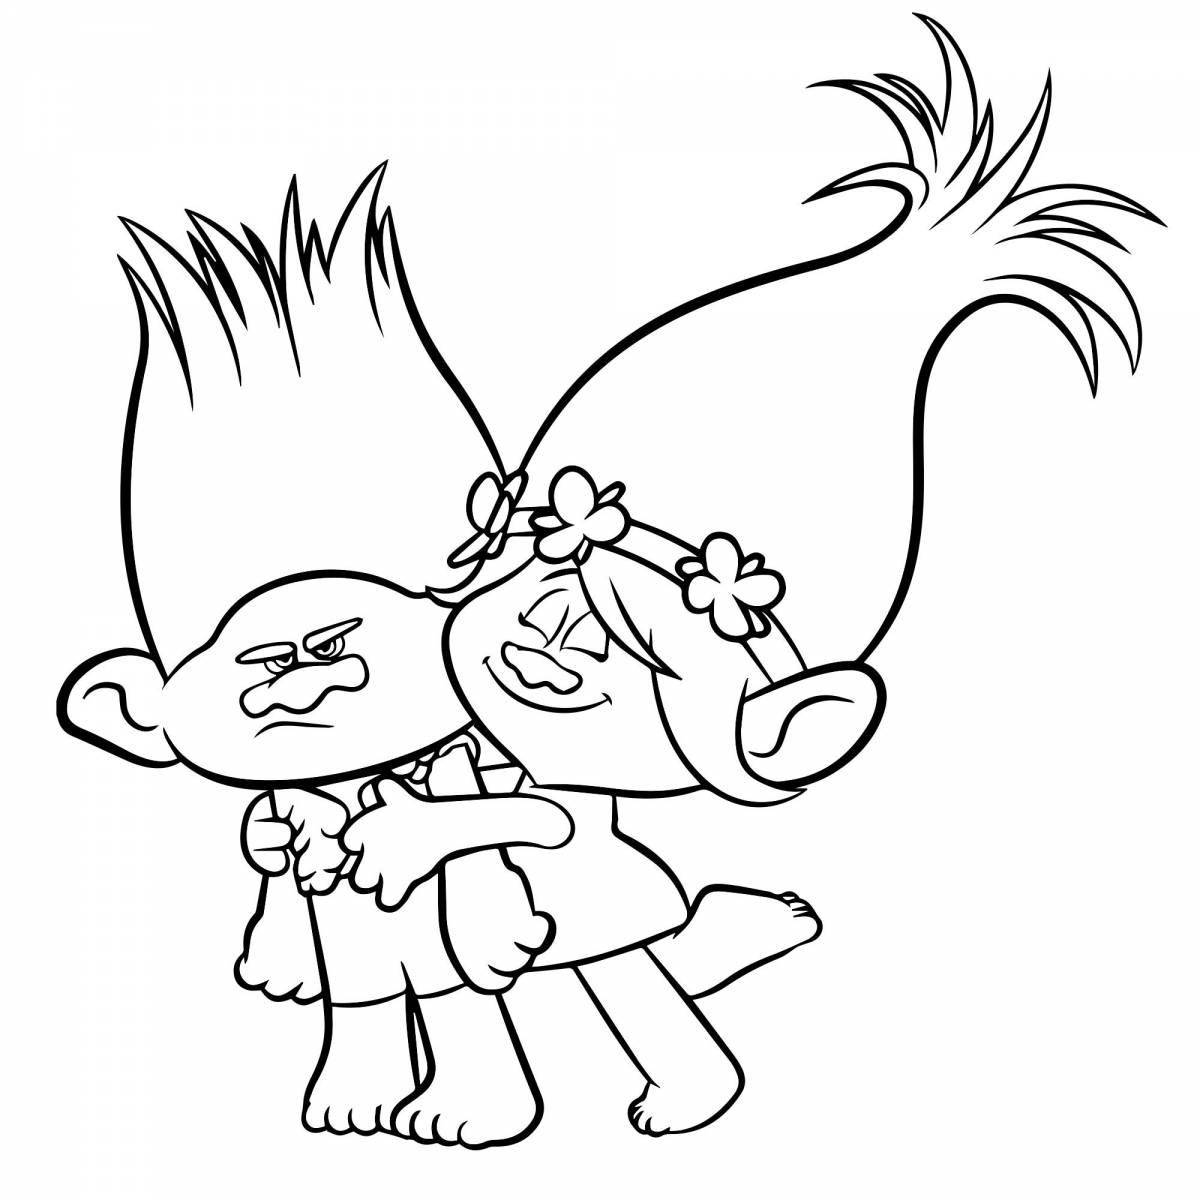 Radiant rosette trolls coloring page